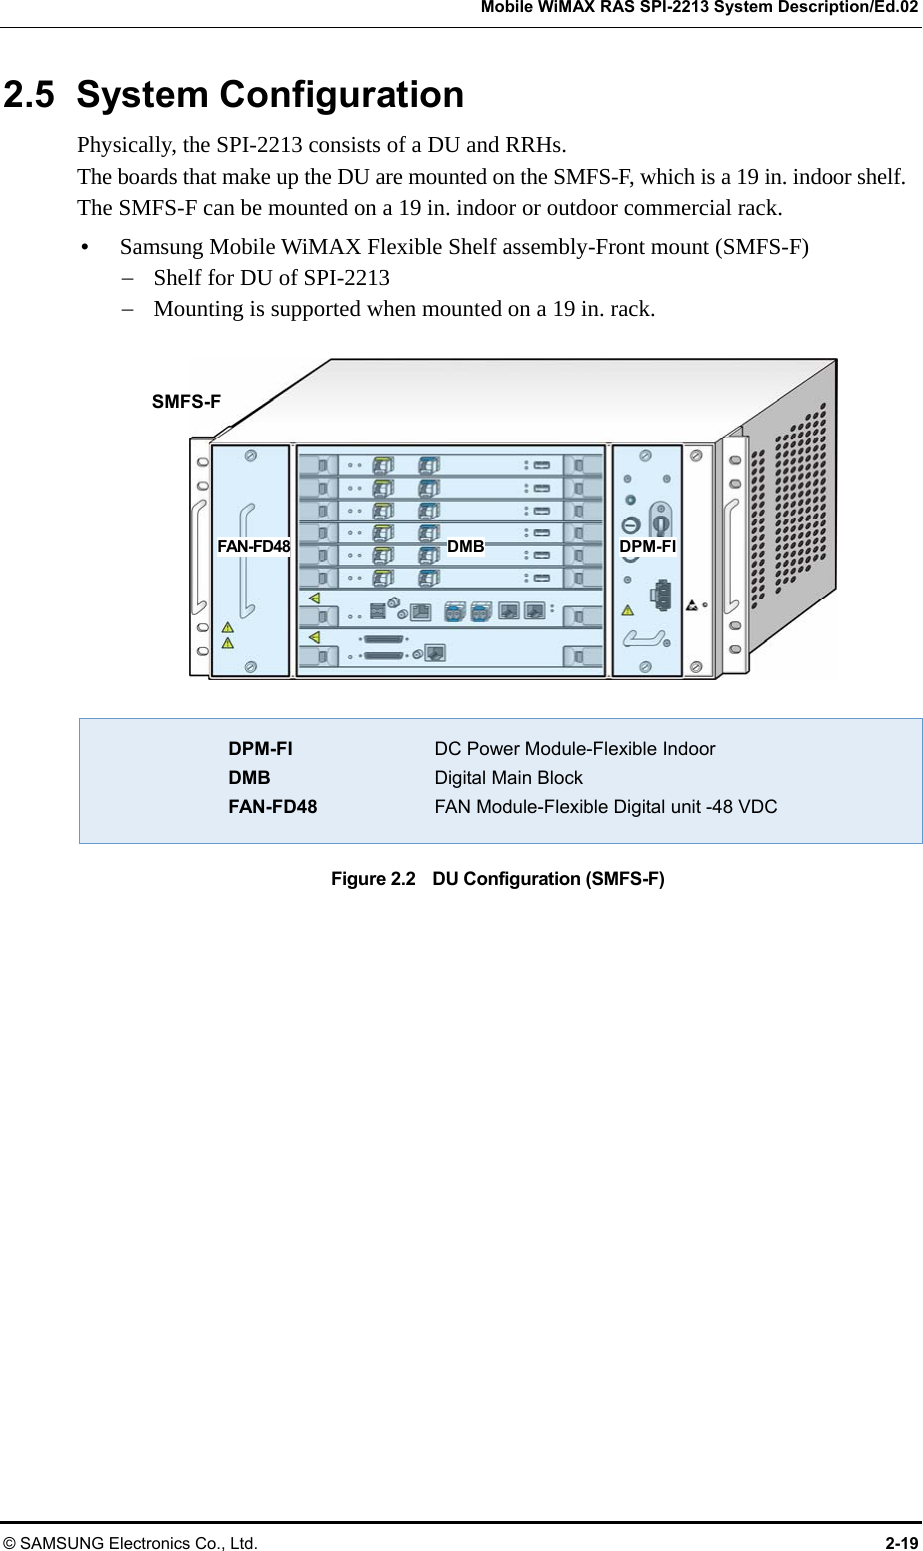   Mobile WiMAX RAS SPI-2213 System Description/Ed.02 © SAMSUNG Electronics Co., Ltd.  2-19 2.5 System Configuration Physically, the SPI-2213 consists of a DU and RRHs. The boards that make up the DU are mounted on the SMFS-F, which is a 19 in. indoor shelf. The SMFS-F can be mounted on a 19 in. indoor or outdoor commercial rack. y Samsung Mobile WiMAX Flexible Shelf assembly-Front mount (SMFS-F) − Shelf for DU of SPI-2213 − Mounting is supported when mounted on a 19 in. rack.    DPM-FI  DC Power Module-Flexible Indoor  DMB  Digital Main Block  FAN-FD48  FAN Module-Flexible Digital unit -48 VDC Figure 2.2    DU Configuration (SMFS-F)  FAN-FD48  DMB  DPM-FI SMFS-F 